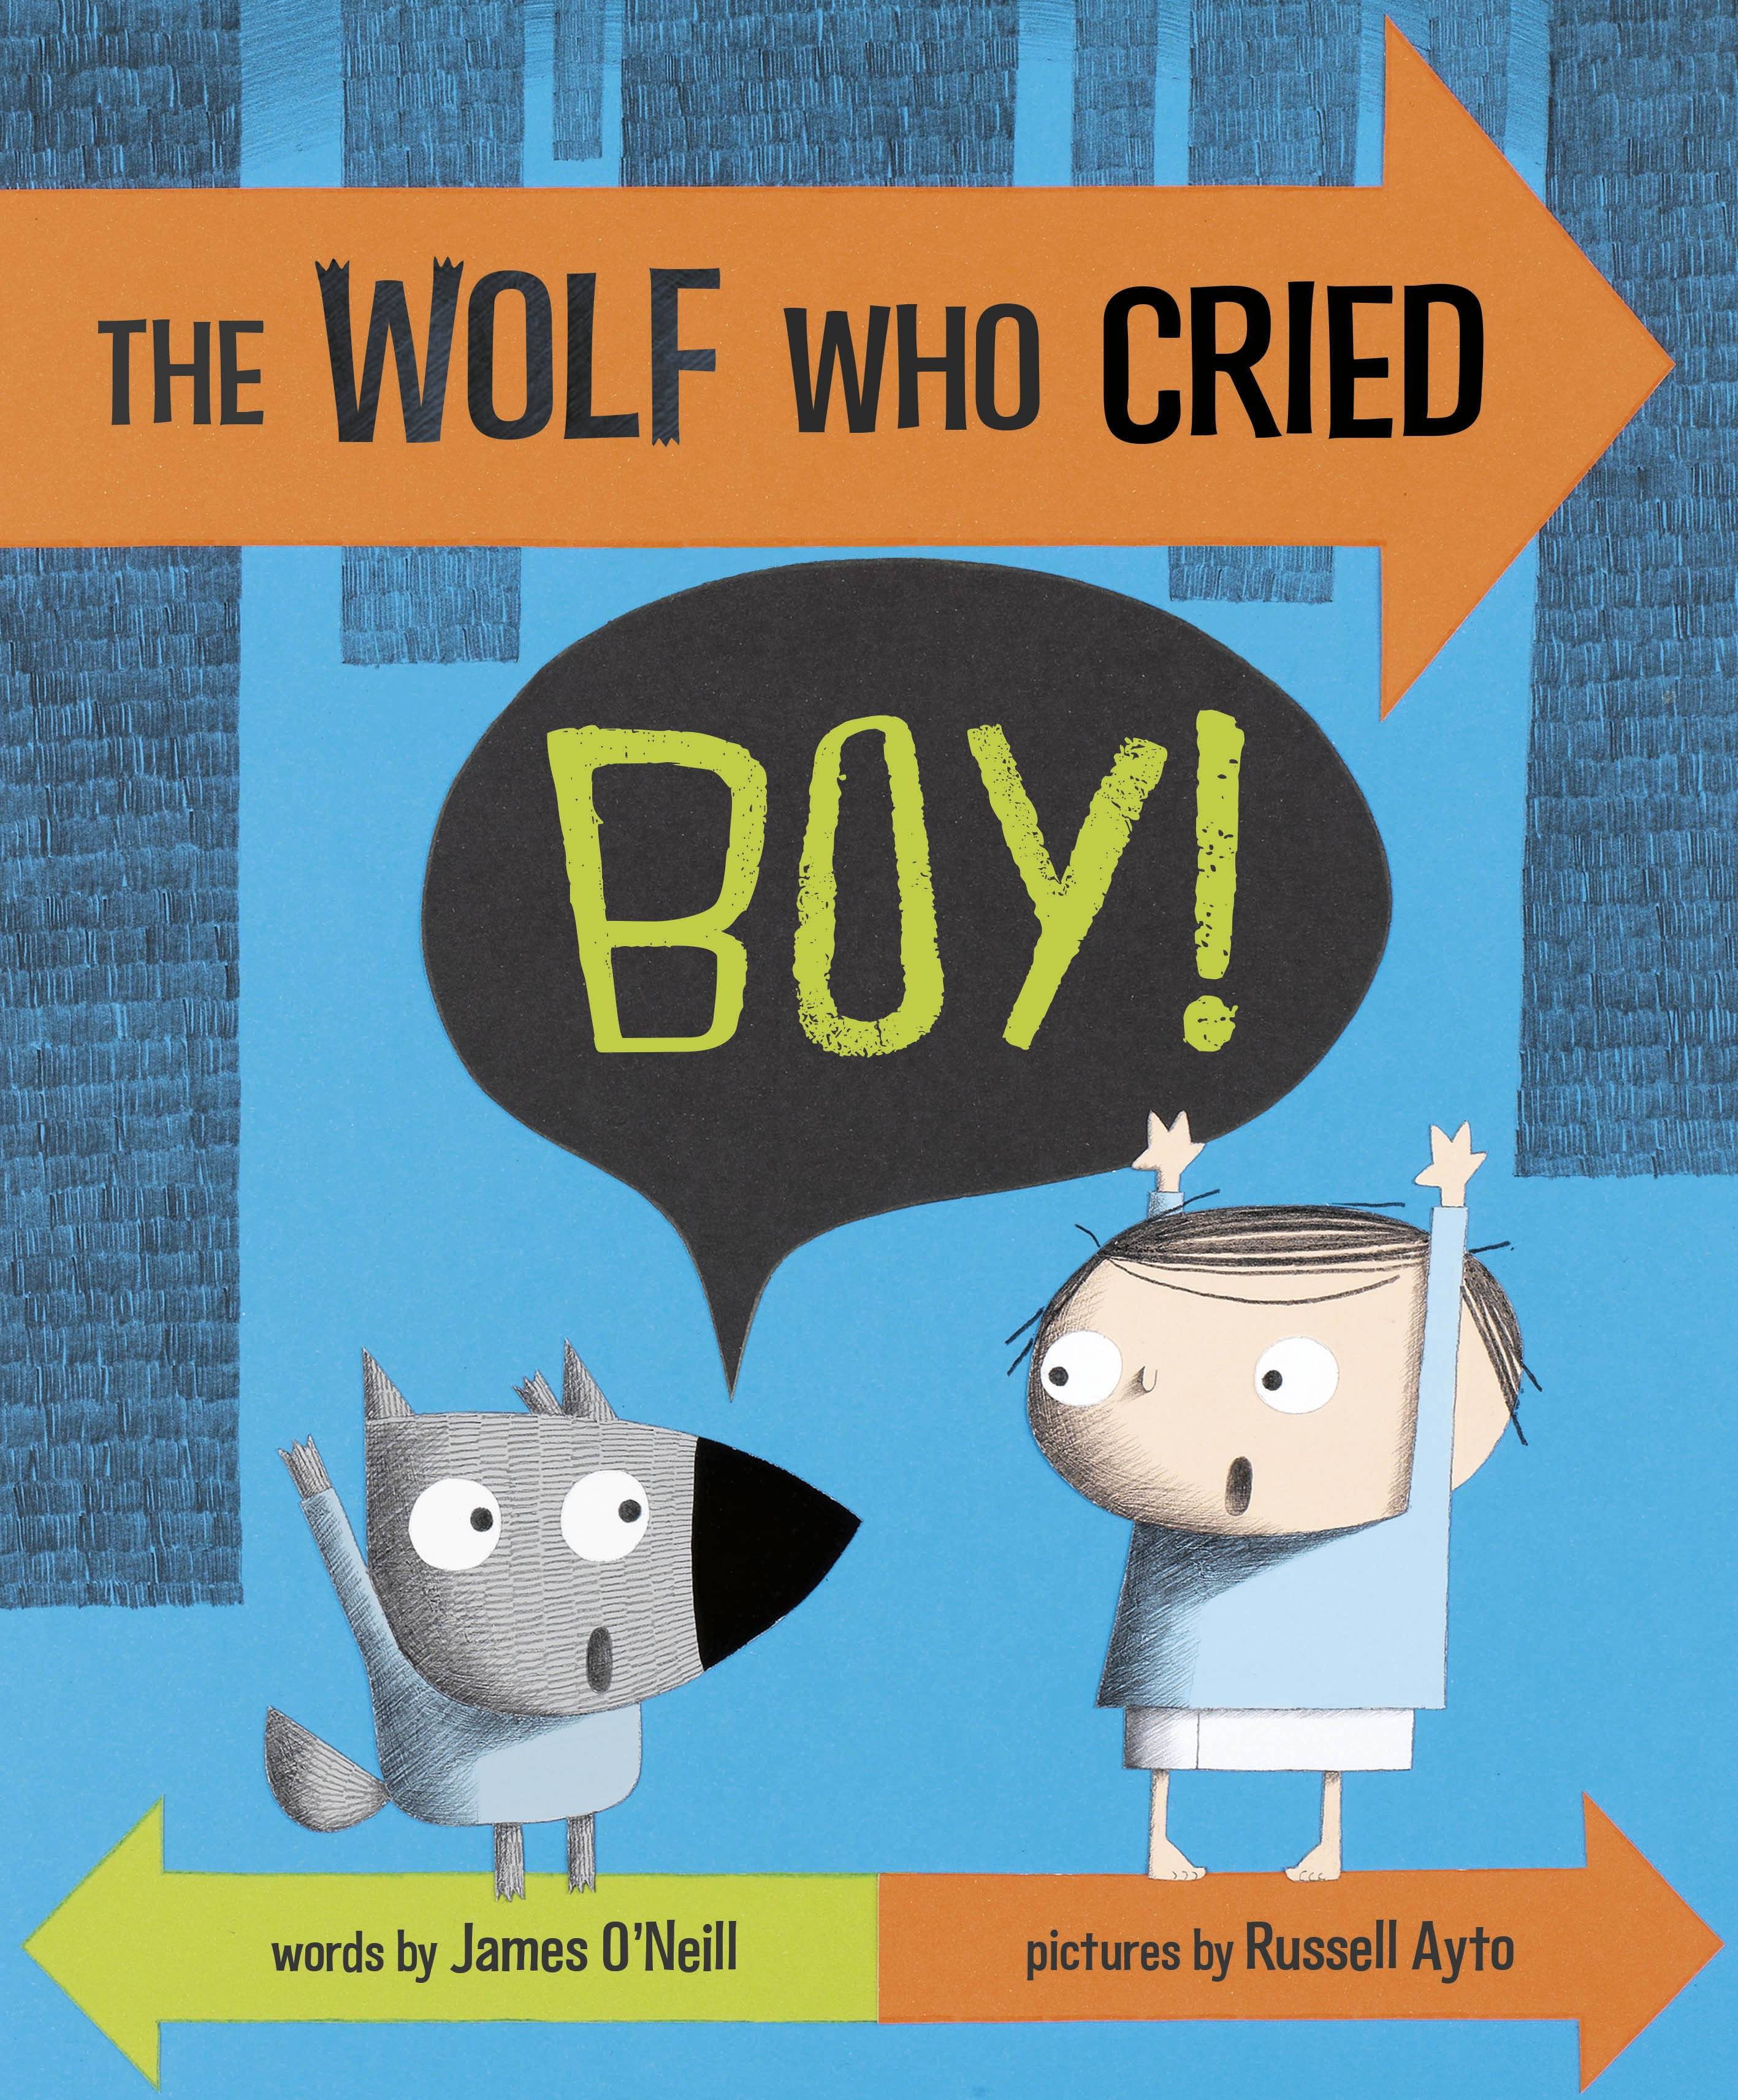 IMG : The Wolf Who Cried Boy